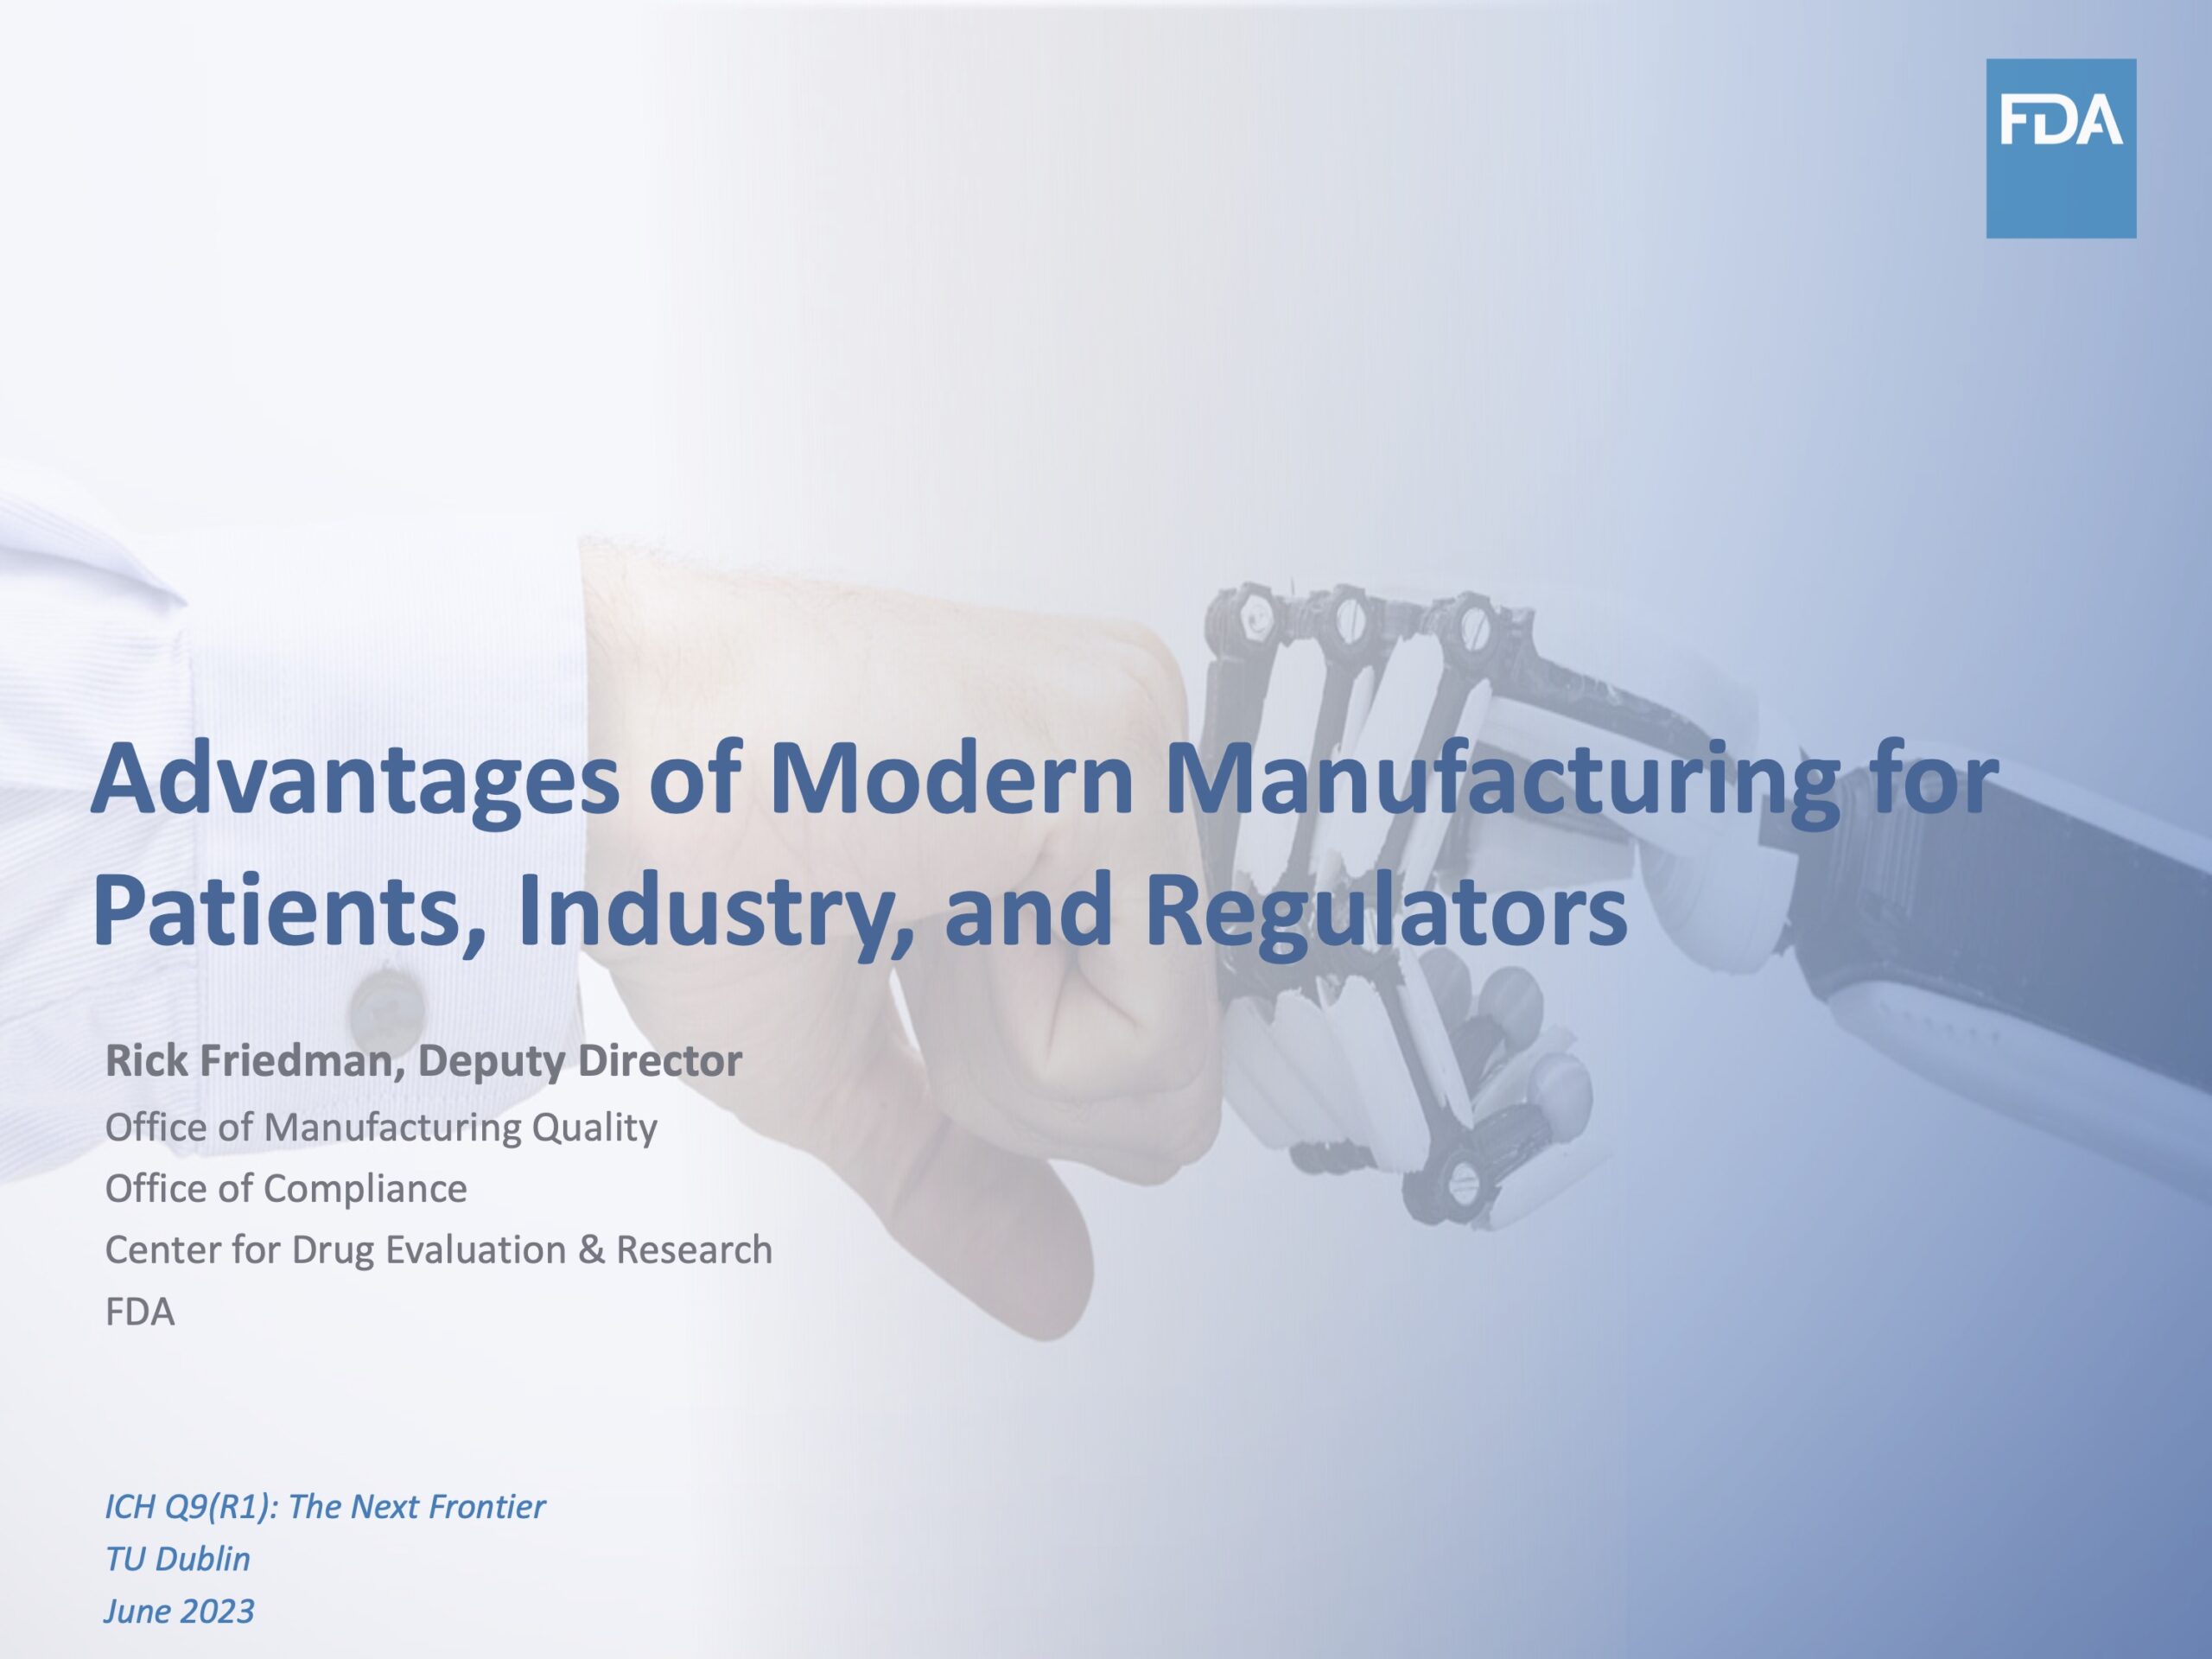 Advantages of Modern Manufacturing for Patients, Industry, and Regulators